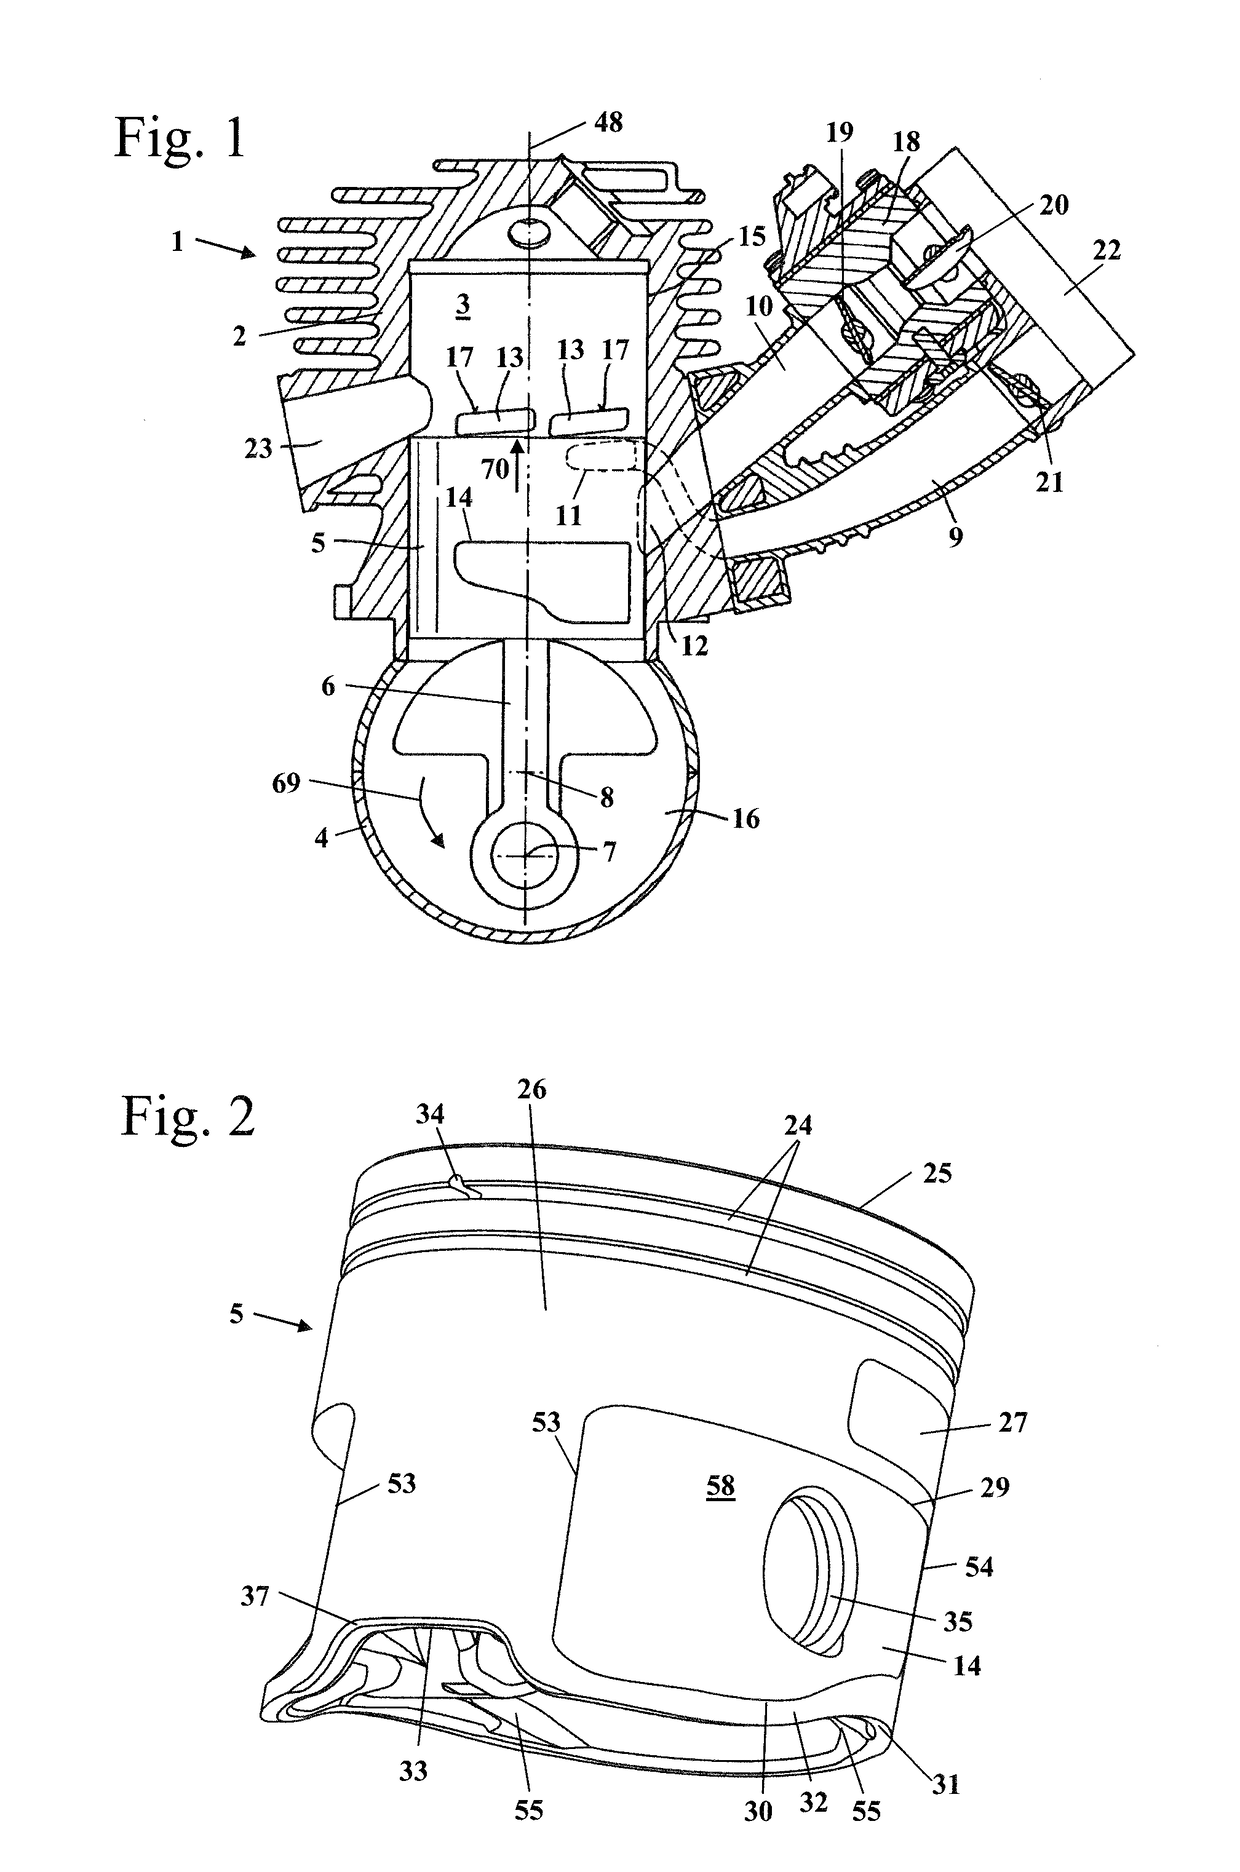 Piston for a two-stroke engine operating with advanced scavenging and a two-stroke engine